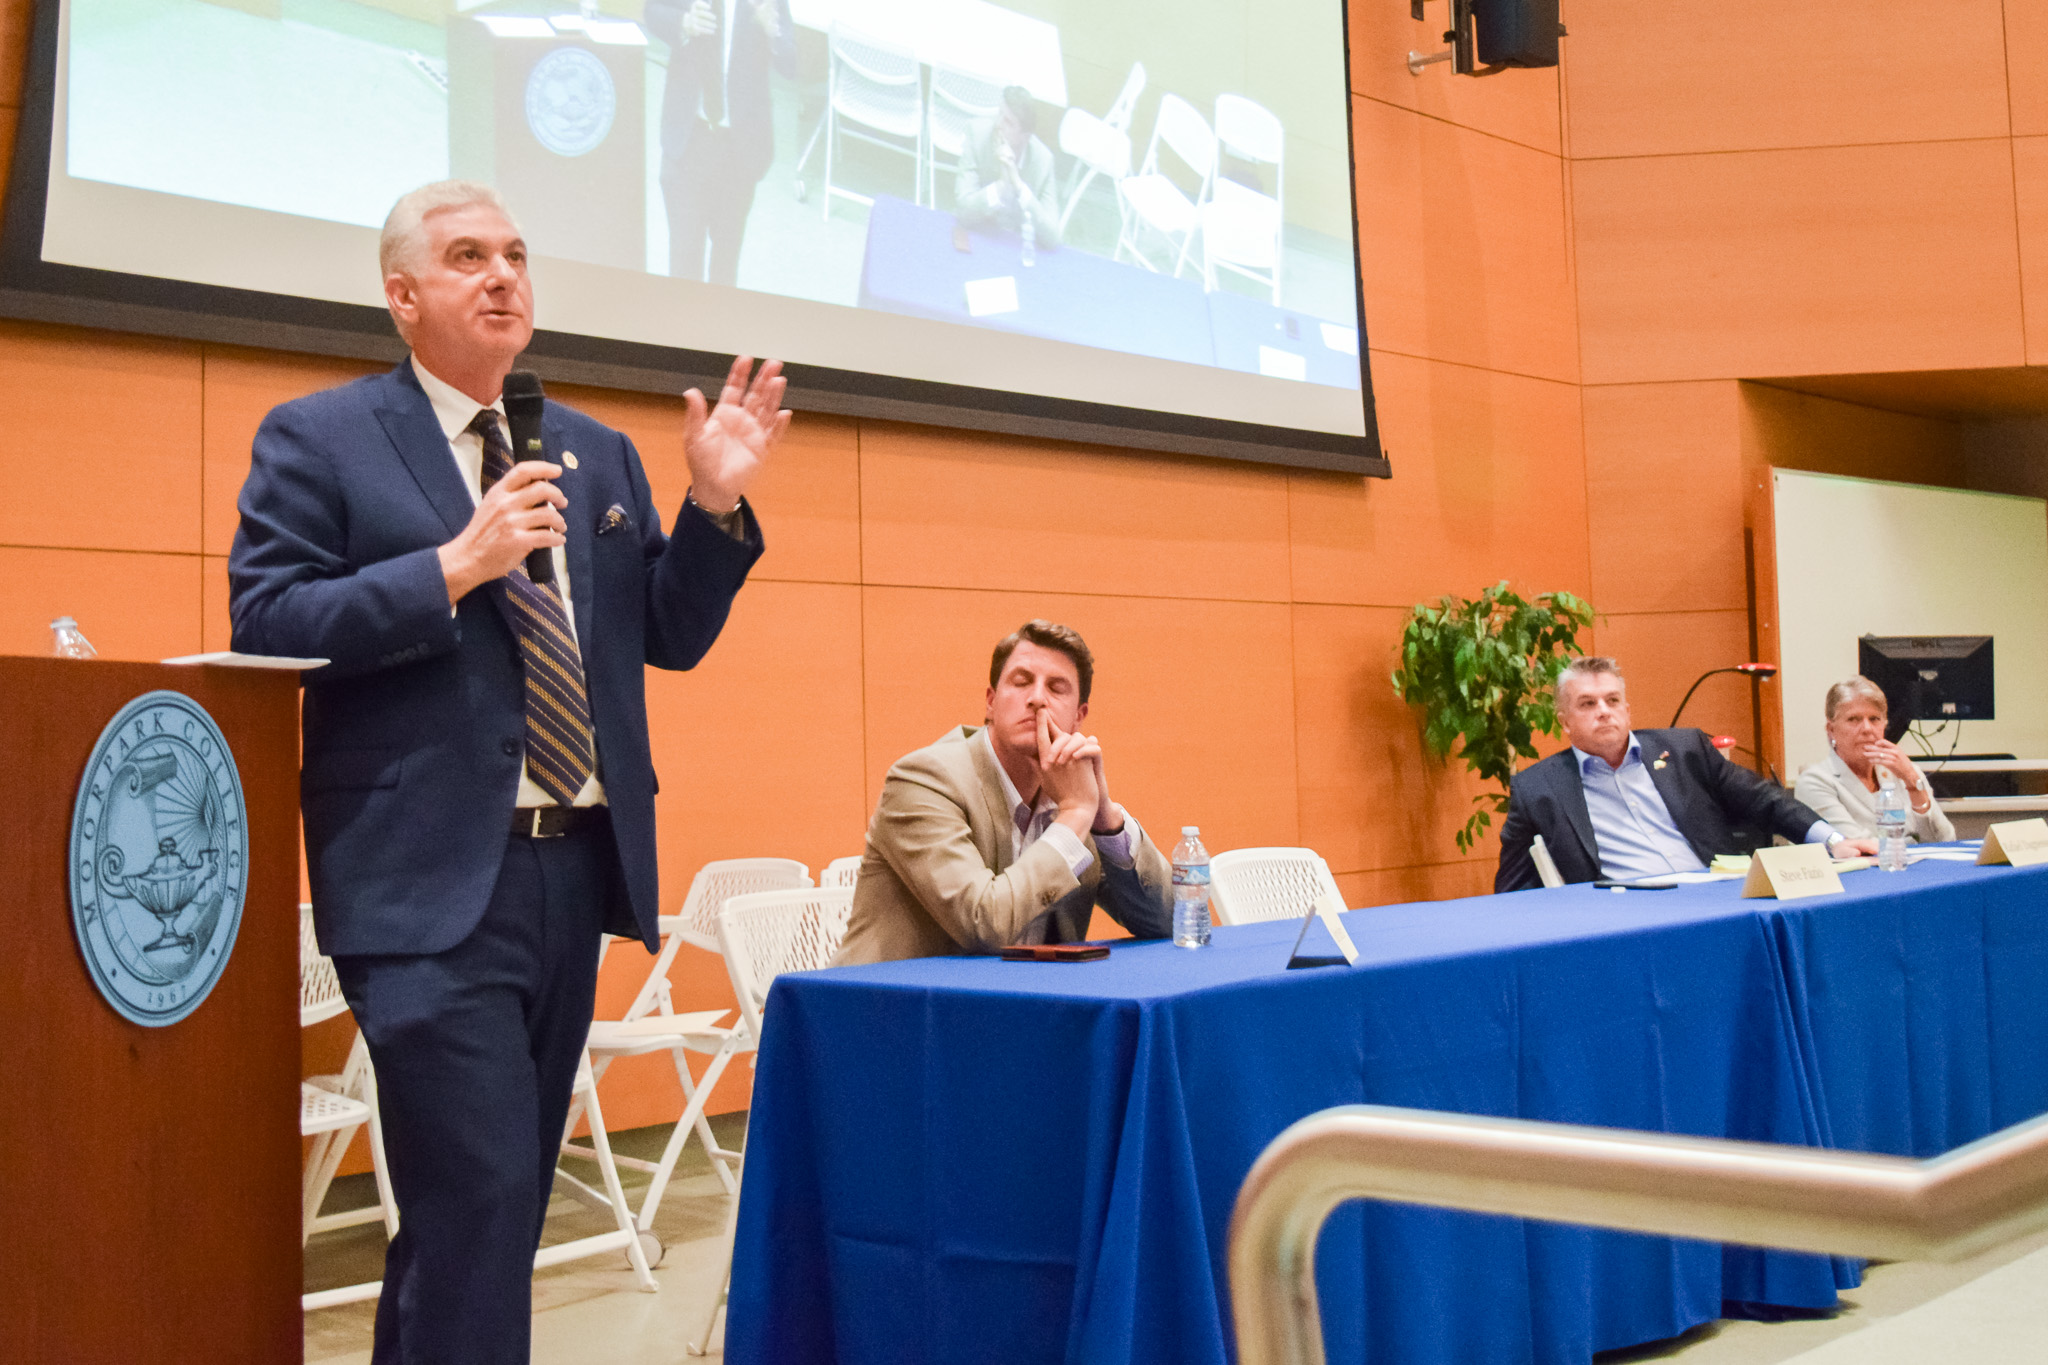 Steve Fazio, running for California State Senate, District 27, speaks as his opponent, Henry Stern listens, along with House Candidates Rafael Dagnesses and Julia Brownley during Moorpark College's Candidate Forum.